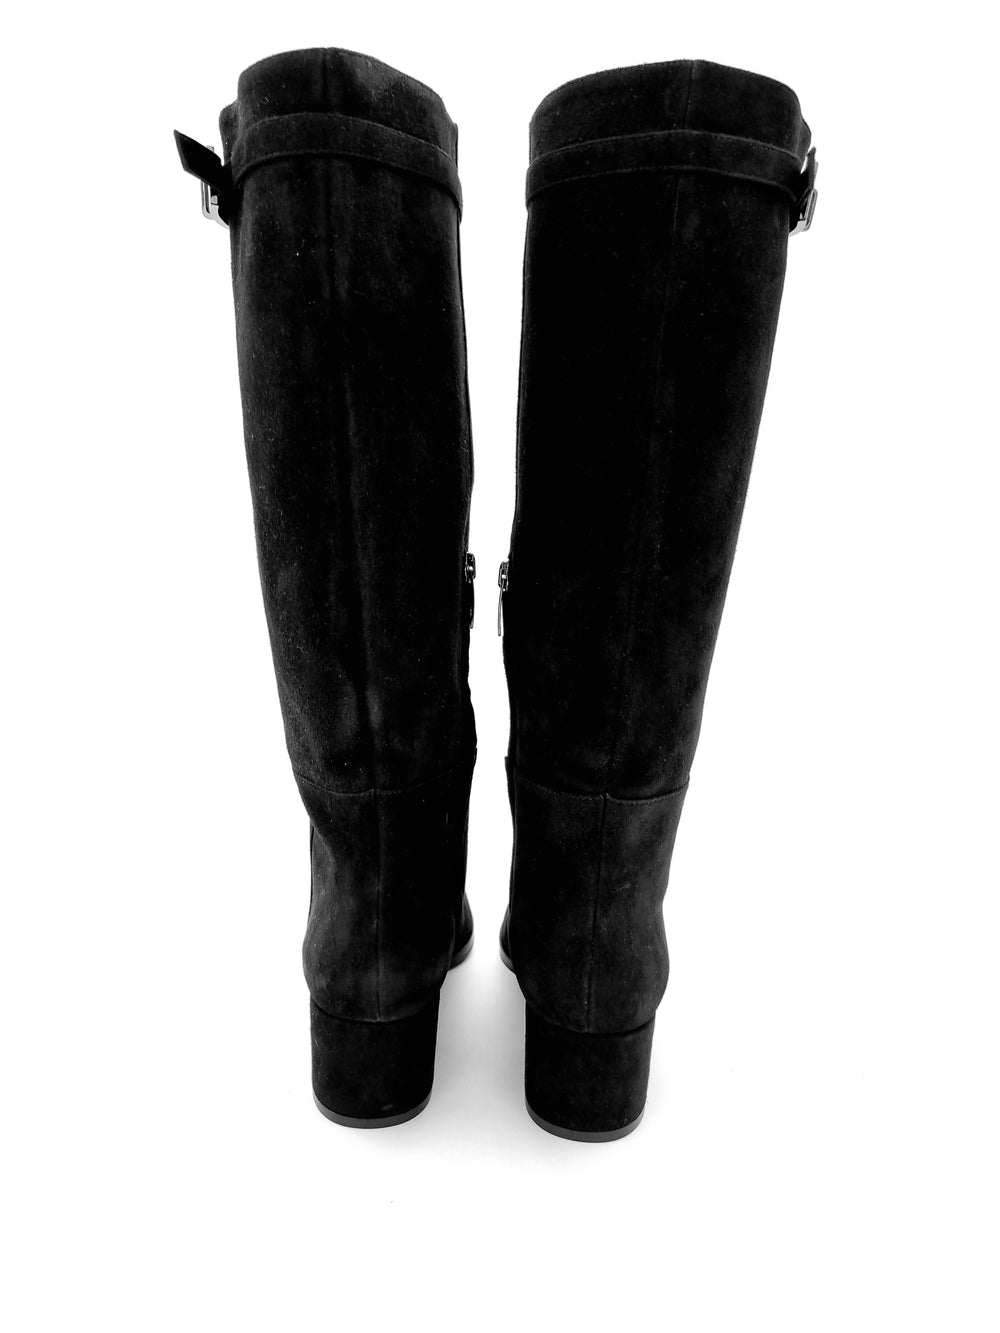 SR Nora Suede Knee-High Boots - SERGIO ROSSI - Liberty Shoes Australia